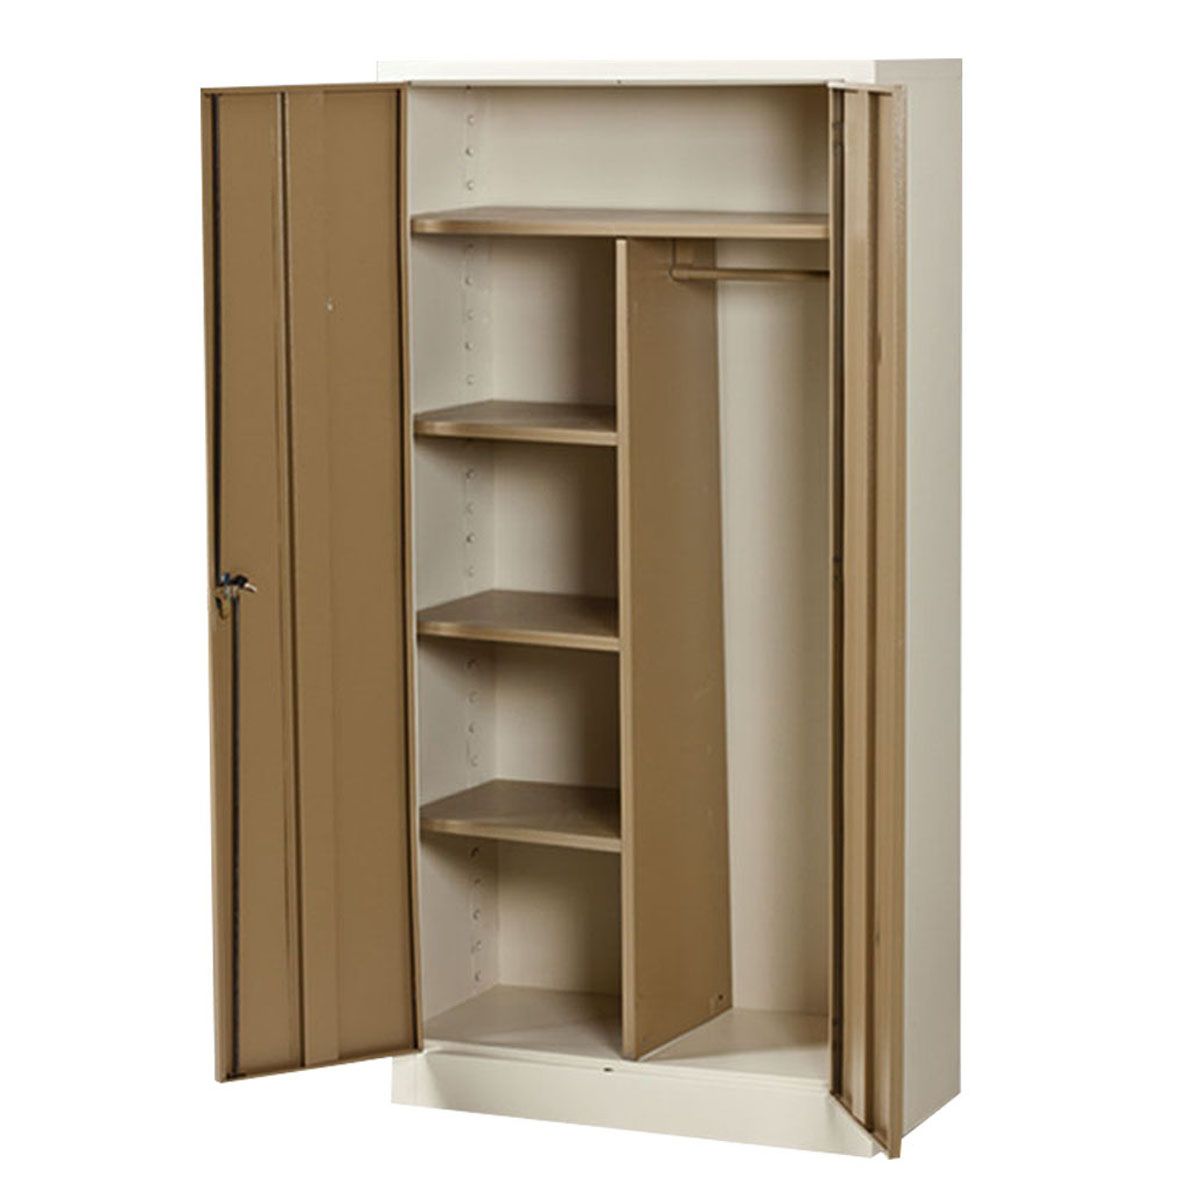 Best And Newest Heavy Duty Wardrobes In Heavy Duty Steel Gents Wardrobe. Shop Online And Save (View 3 of 10)